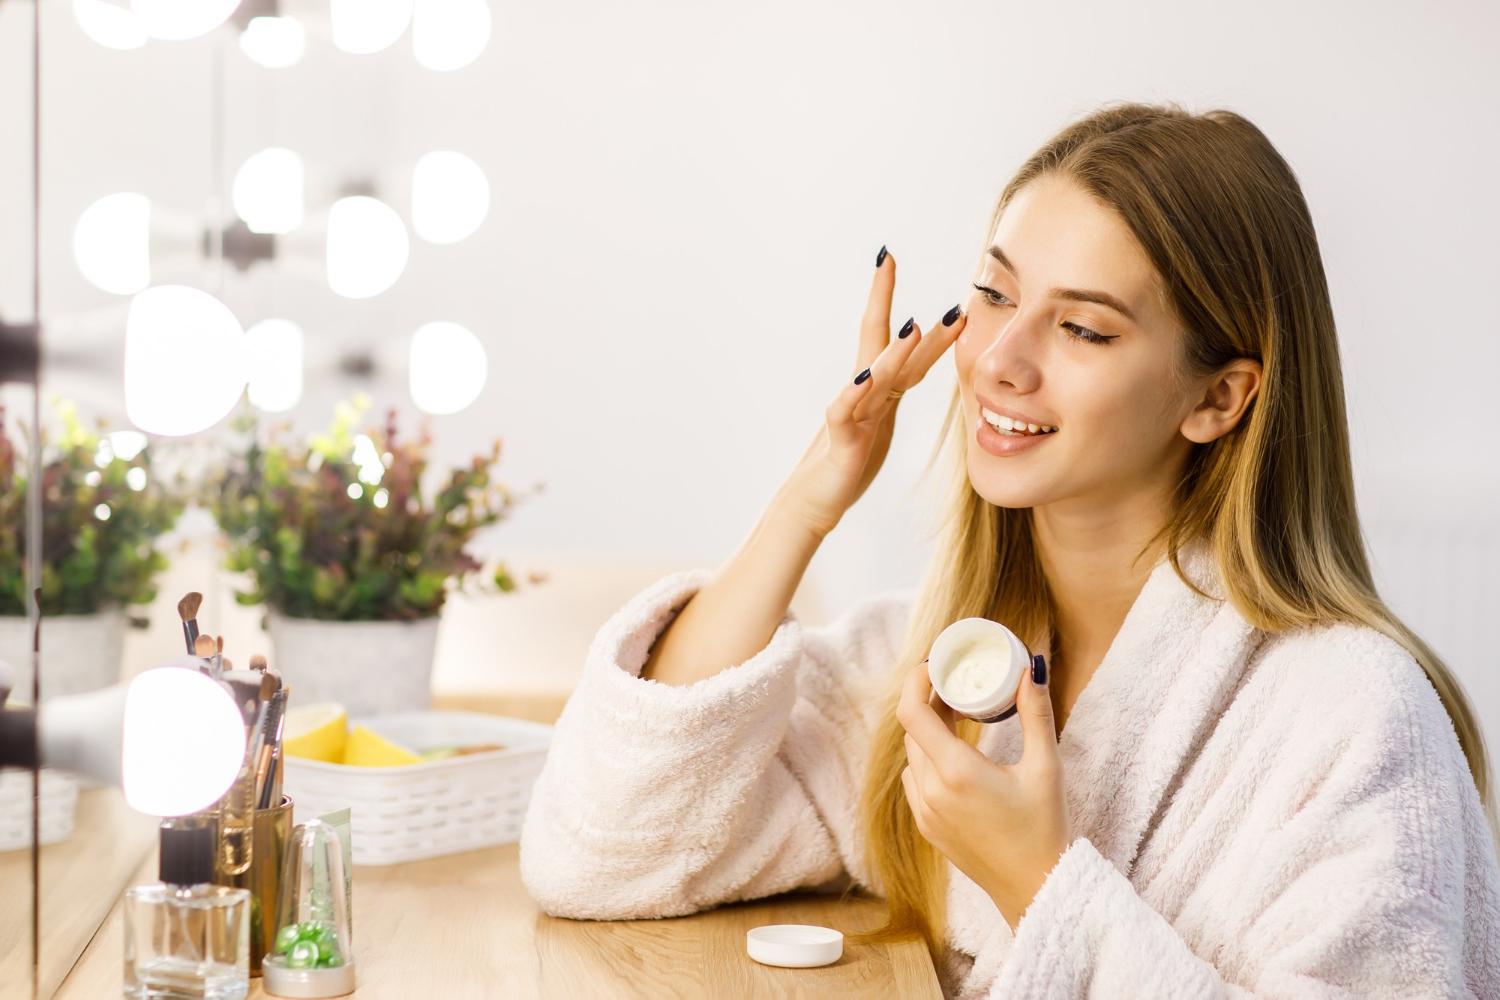 What Is A Healthy Skincare Routine For Maintaining Glowing Skin?